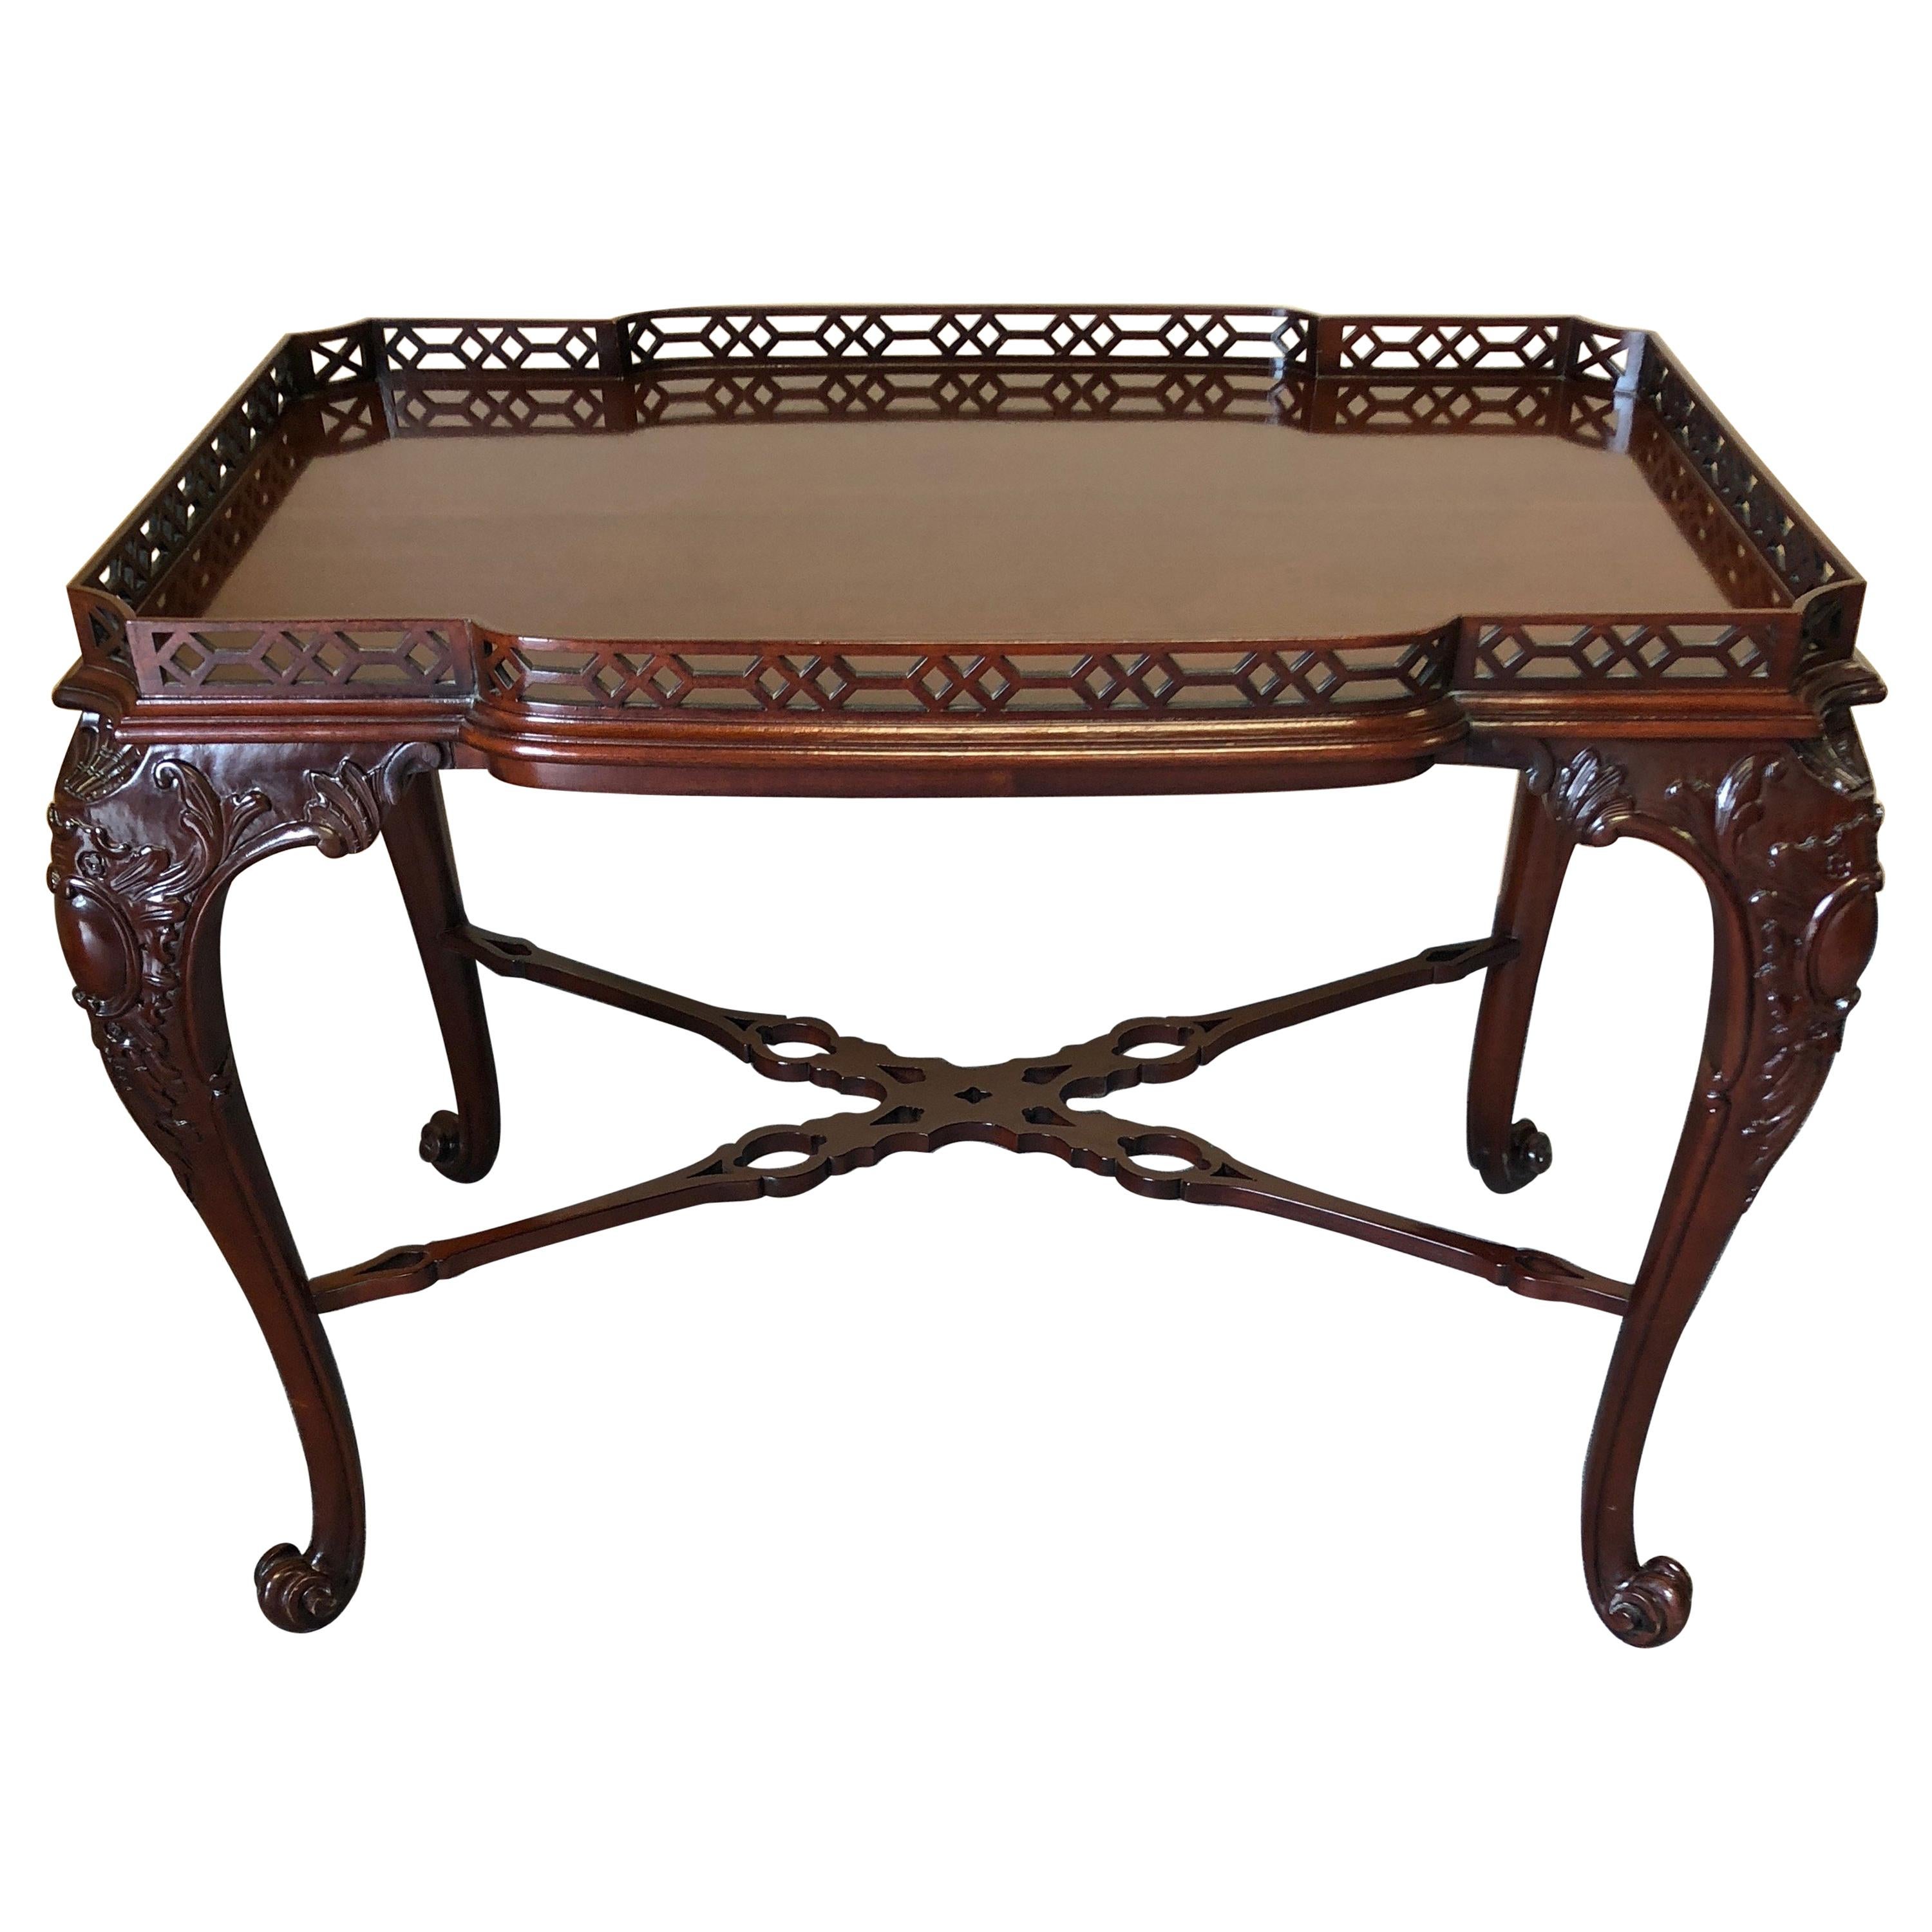 Lovely Widdicomb Carved Mahogany Tea Table Cocktail Table